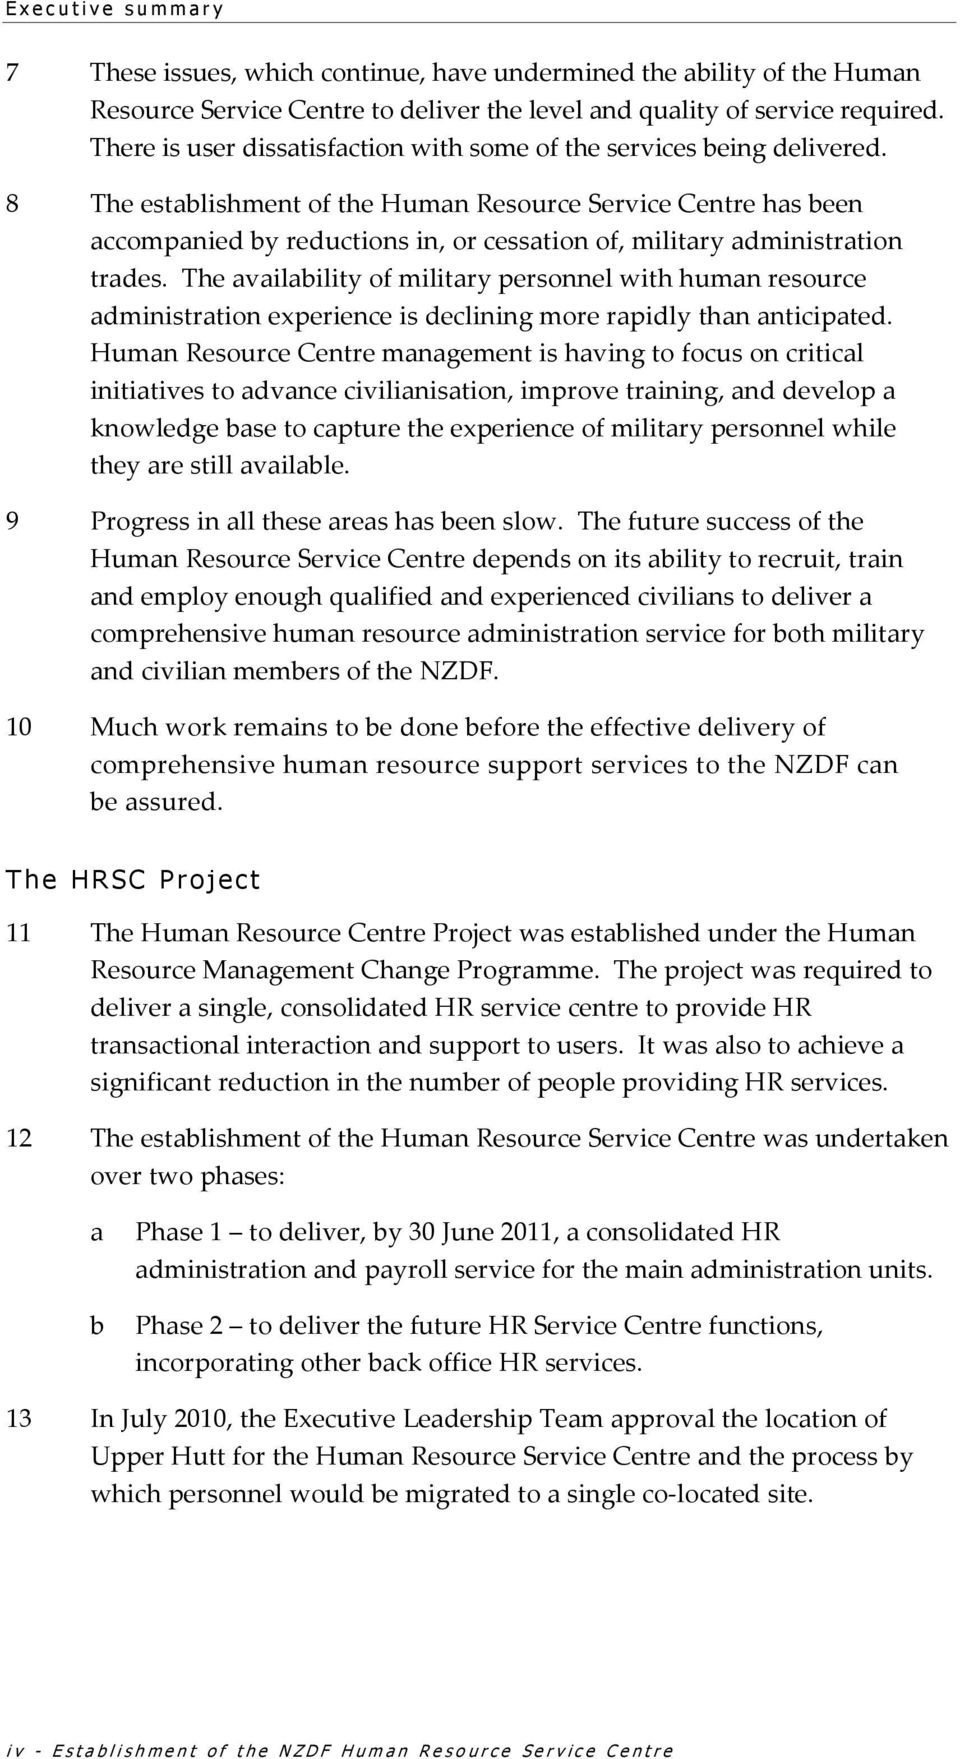 8 The establishment of the Human Resource Service Centre has been accompanied by reductions in, or cessation of, military administration trades.